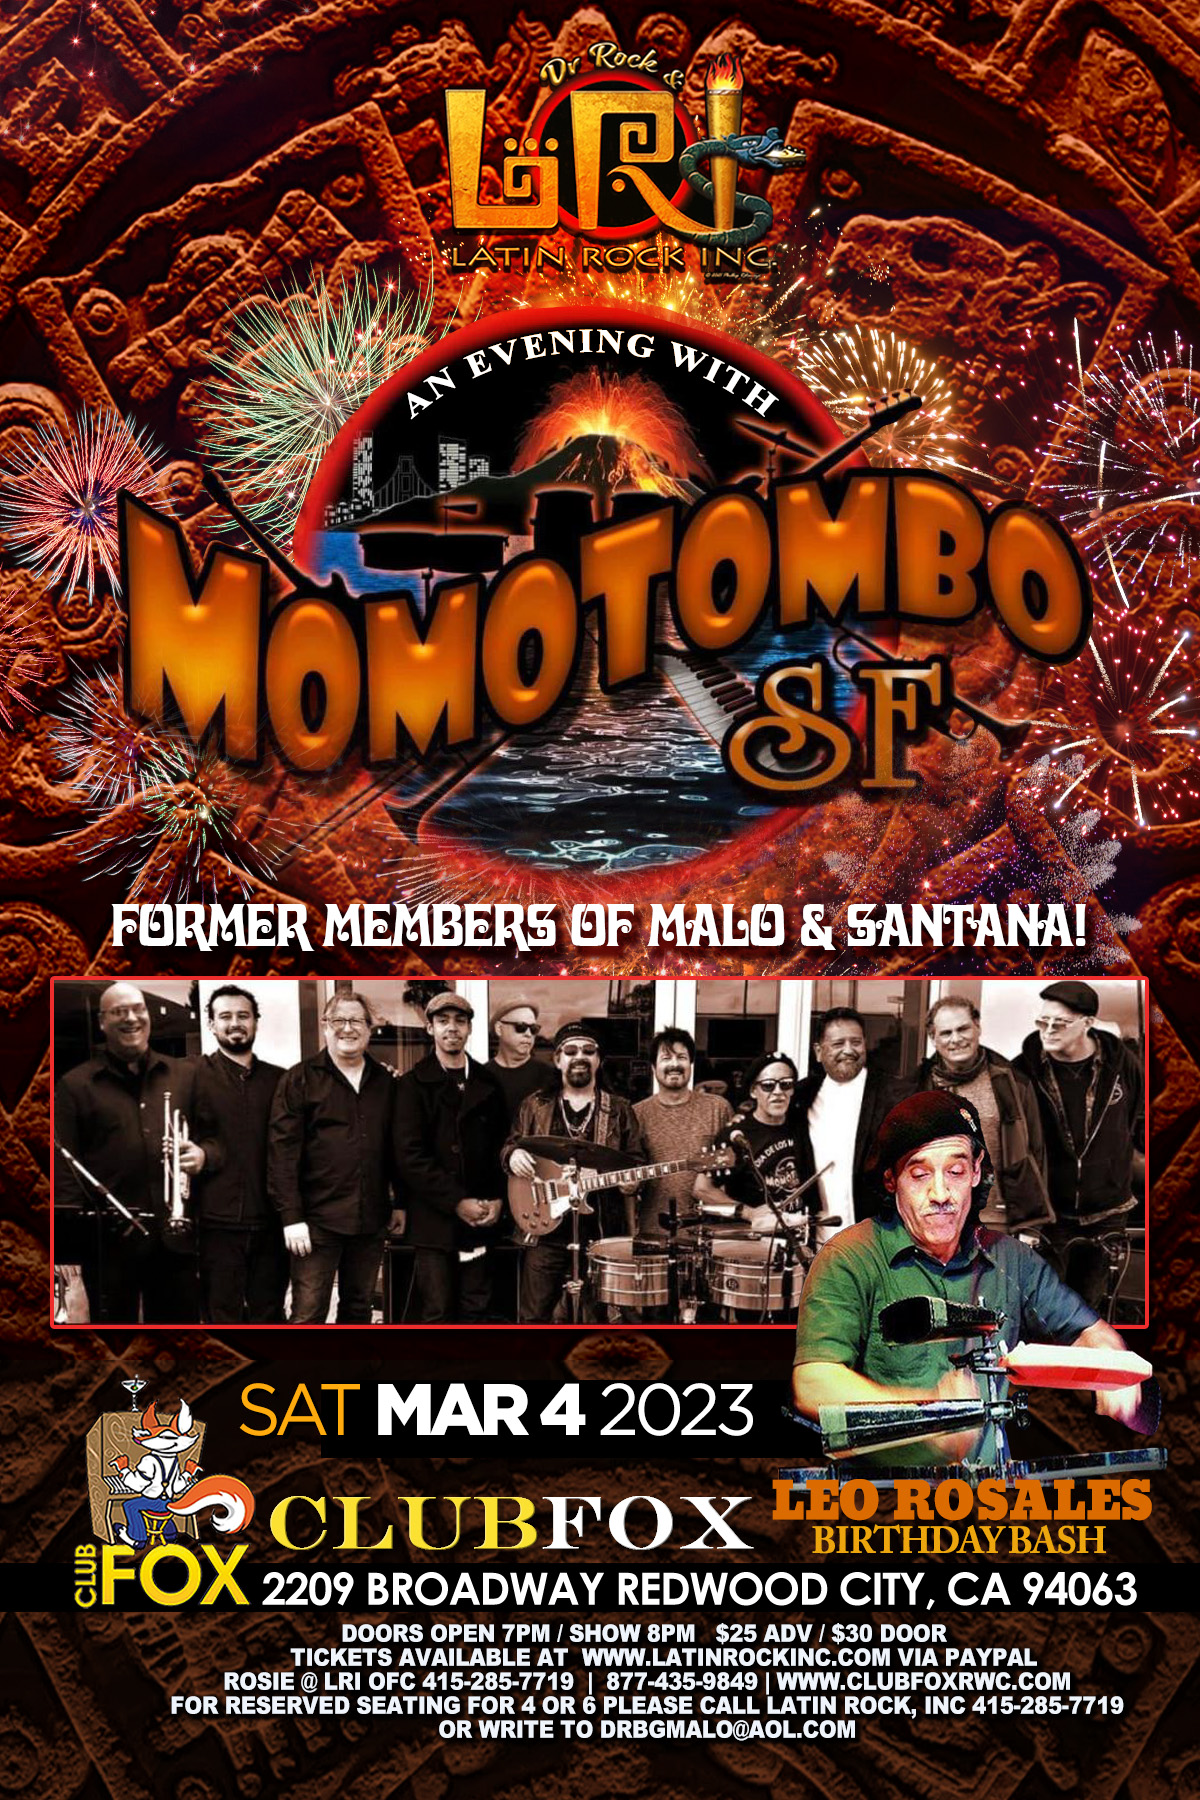 Momotombo Saturday March 4, 2023 at Club Fox in Redwood City, CA